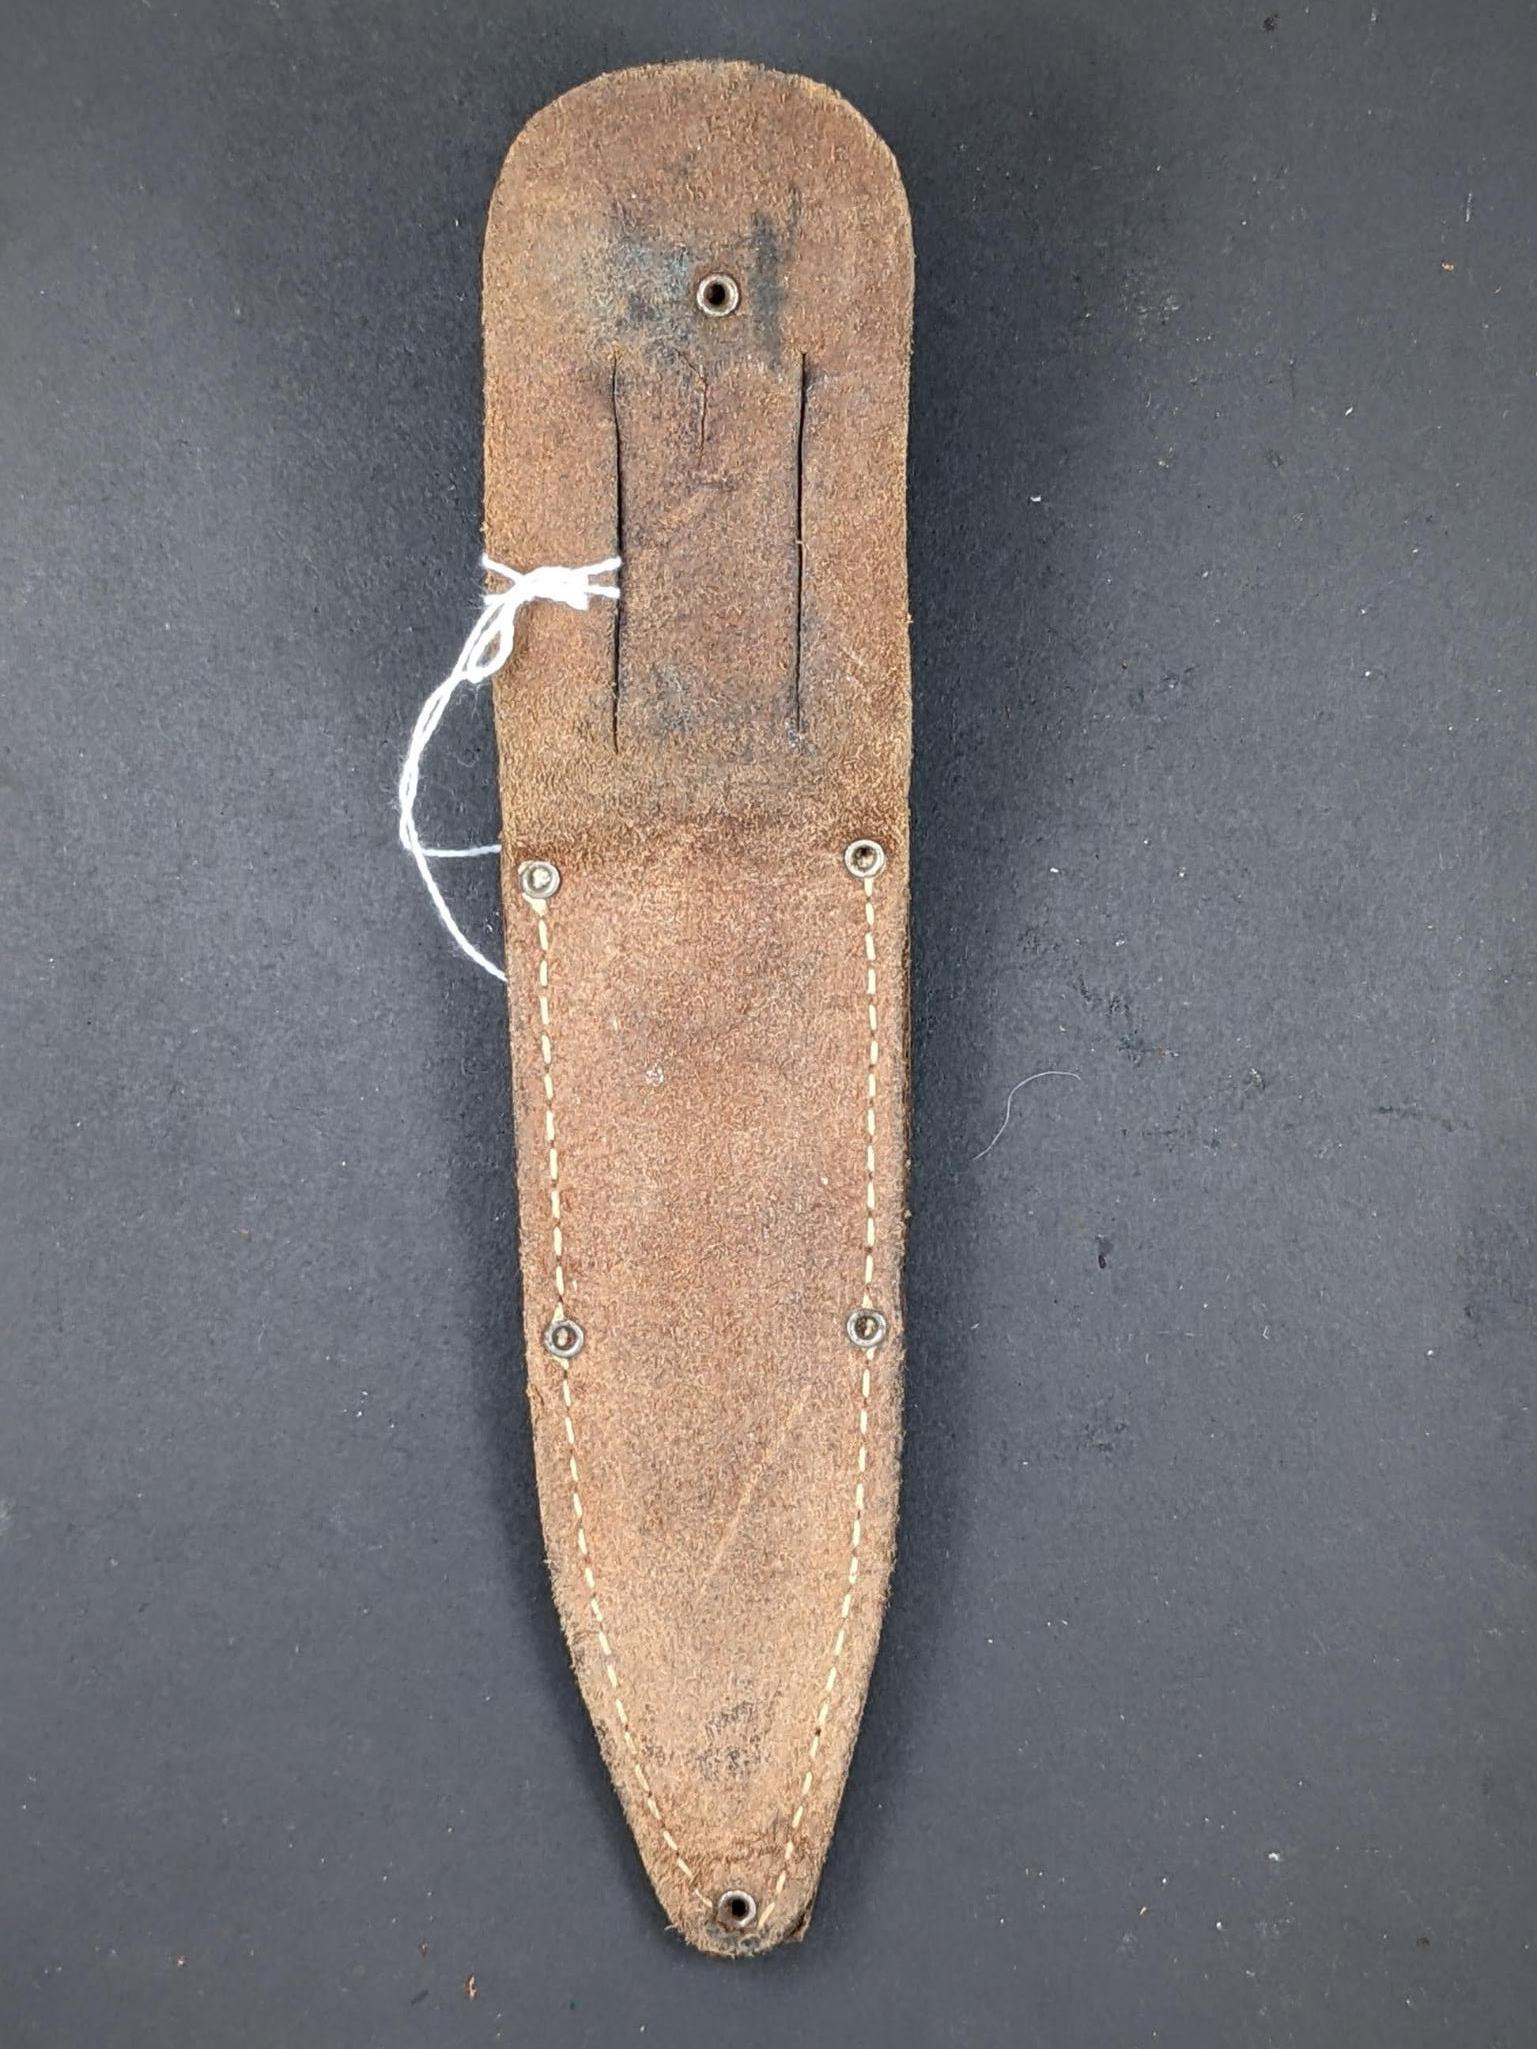 Imperial Prov, R.I. U.S.A sheath knife. Measures 9'' overall. The handle and blade are both tight.